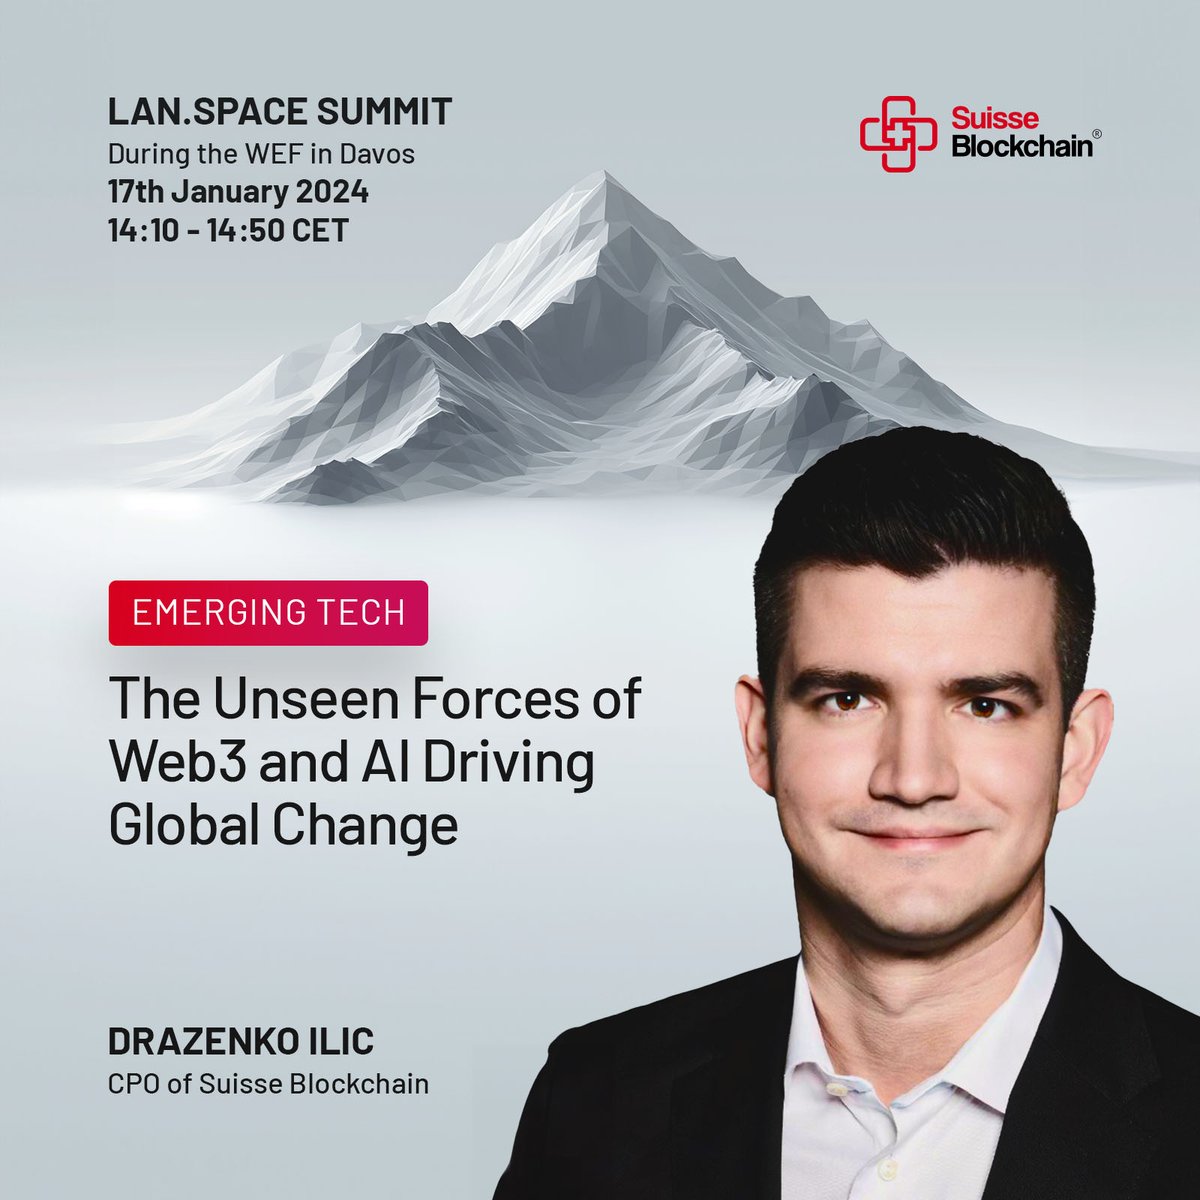 One of our key team members is joining the LAN.SPACE SUMMIT panel taking place during the World Economic Forum! 🔍 Panel: “Emerging Tech: The Unseen Forces of Web3 and AI Driving Global Change” ⏰ Time: 14:10 - 14:50 CET #LANSPACESUMMIT #WEF #Web3 #AI #Innovation